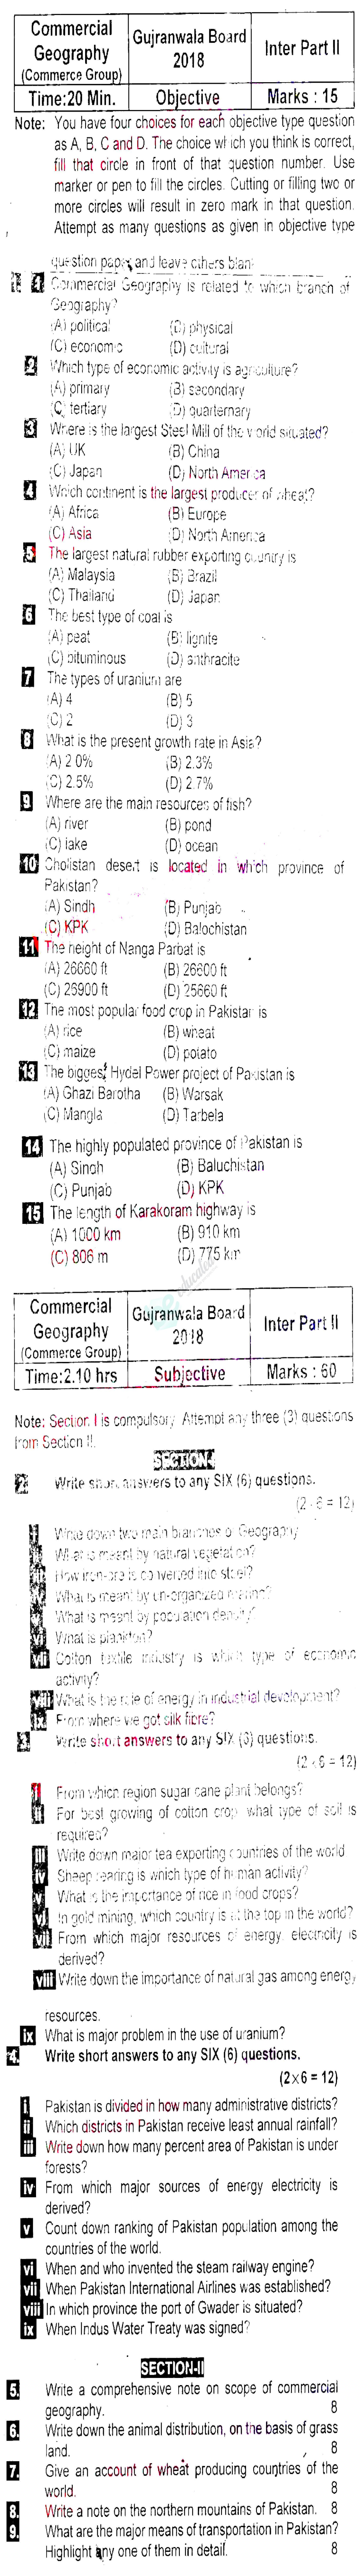 Commercial Geography ICOM Part 2 Past Paper Group 2 BISE Gujranwala 2018